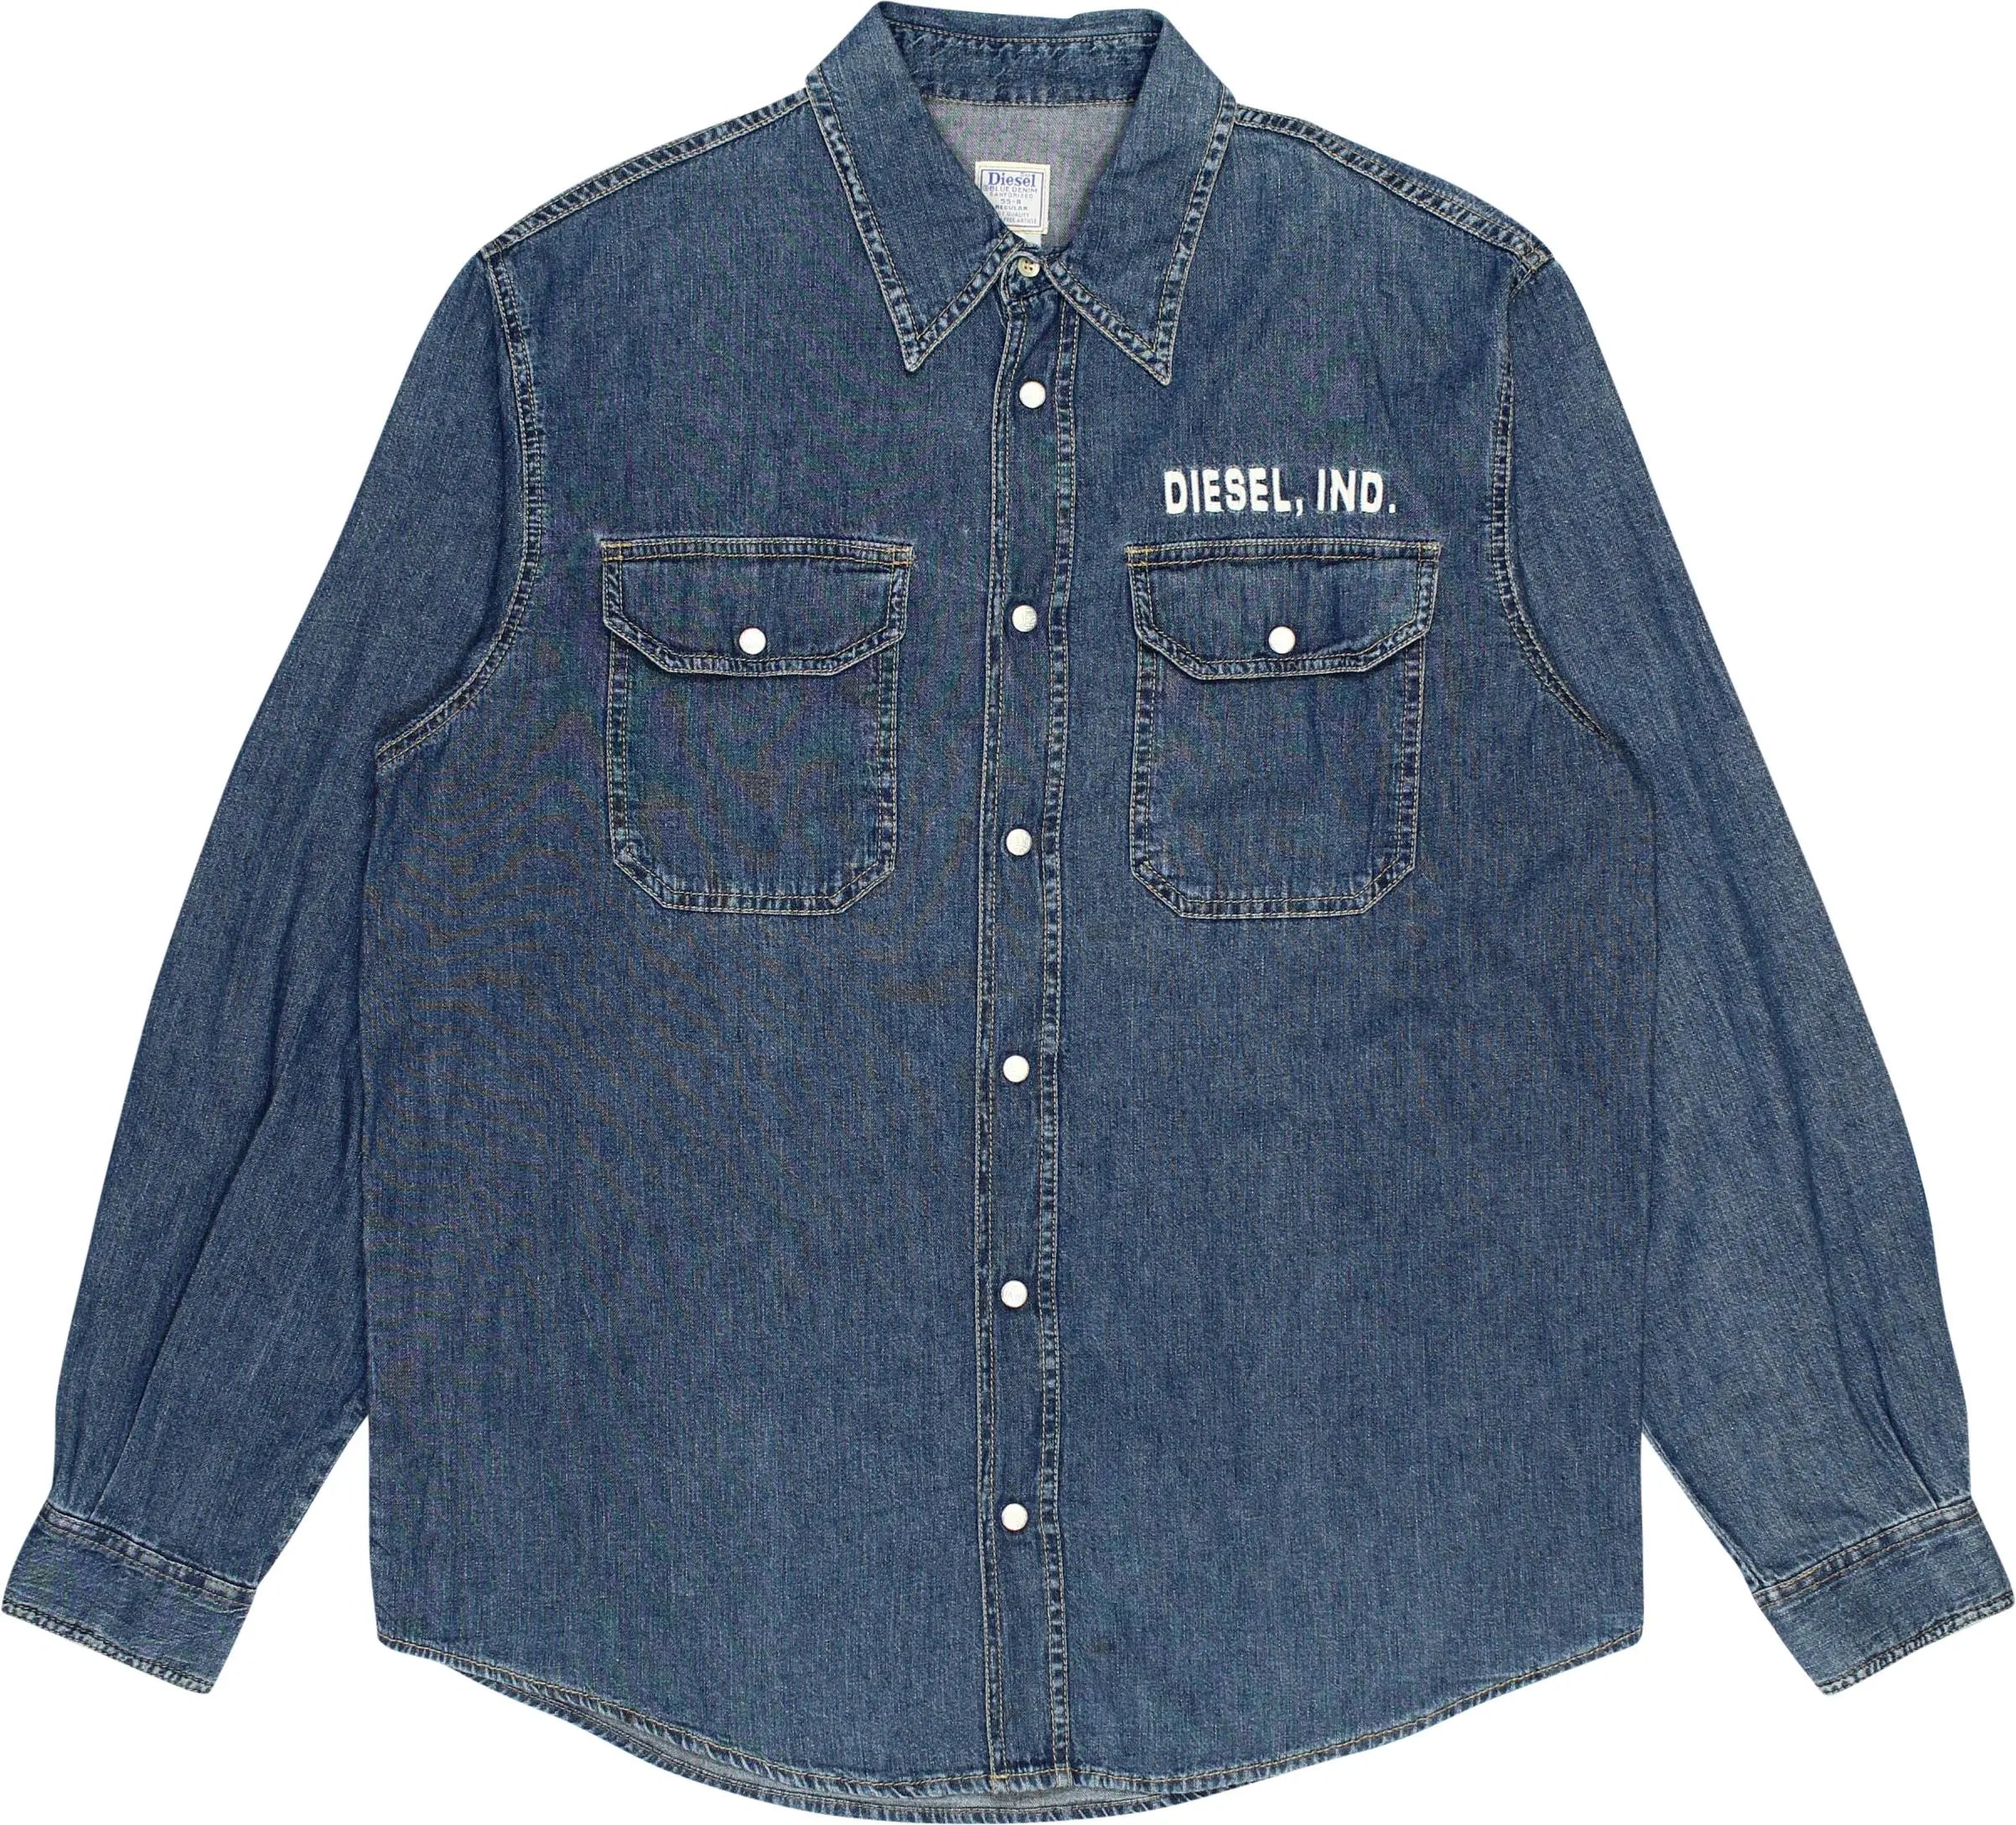 Diesel - 90s Denim Shirt by Diesel- ThriftTale.com - Vintage and second handclothing